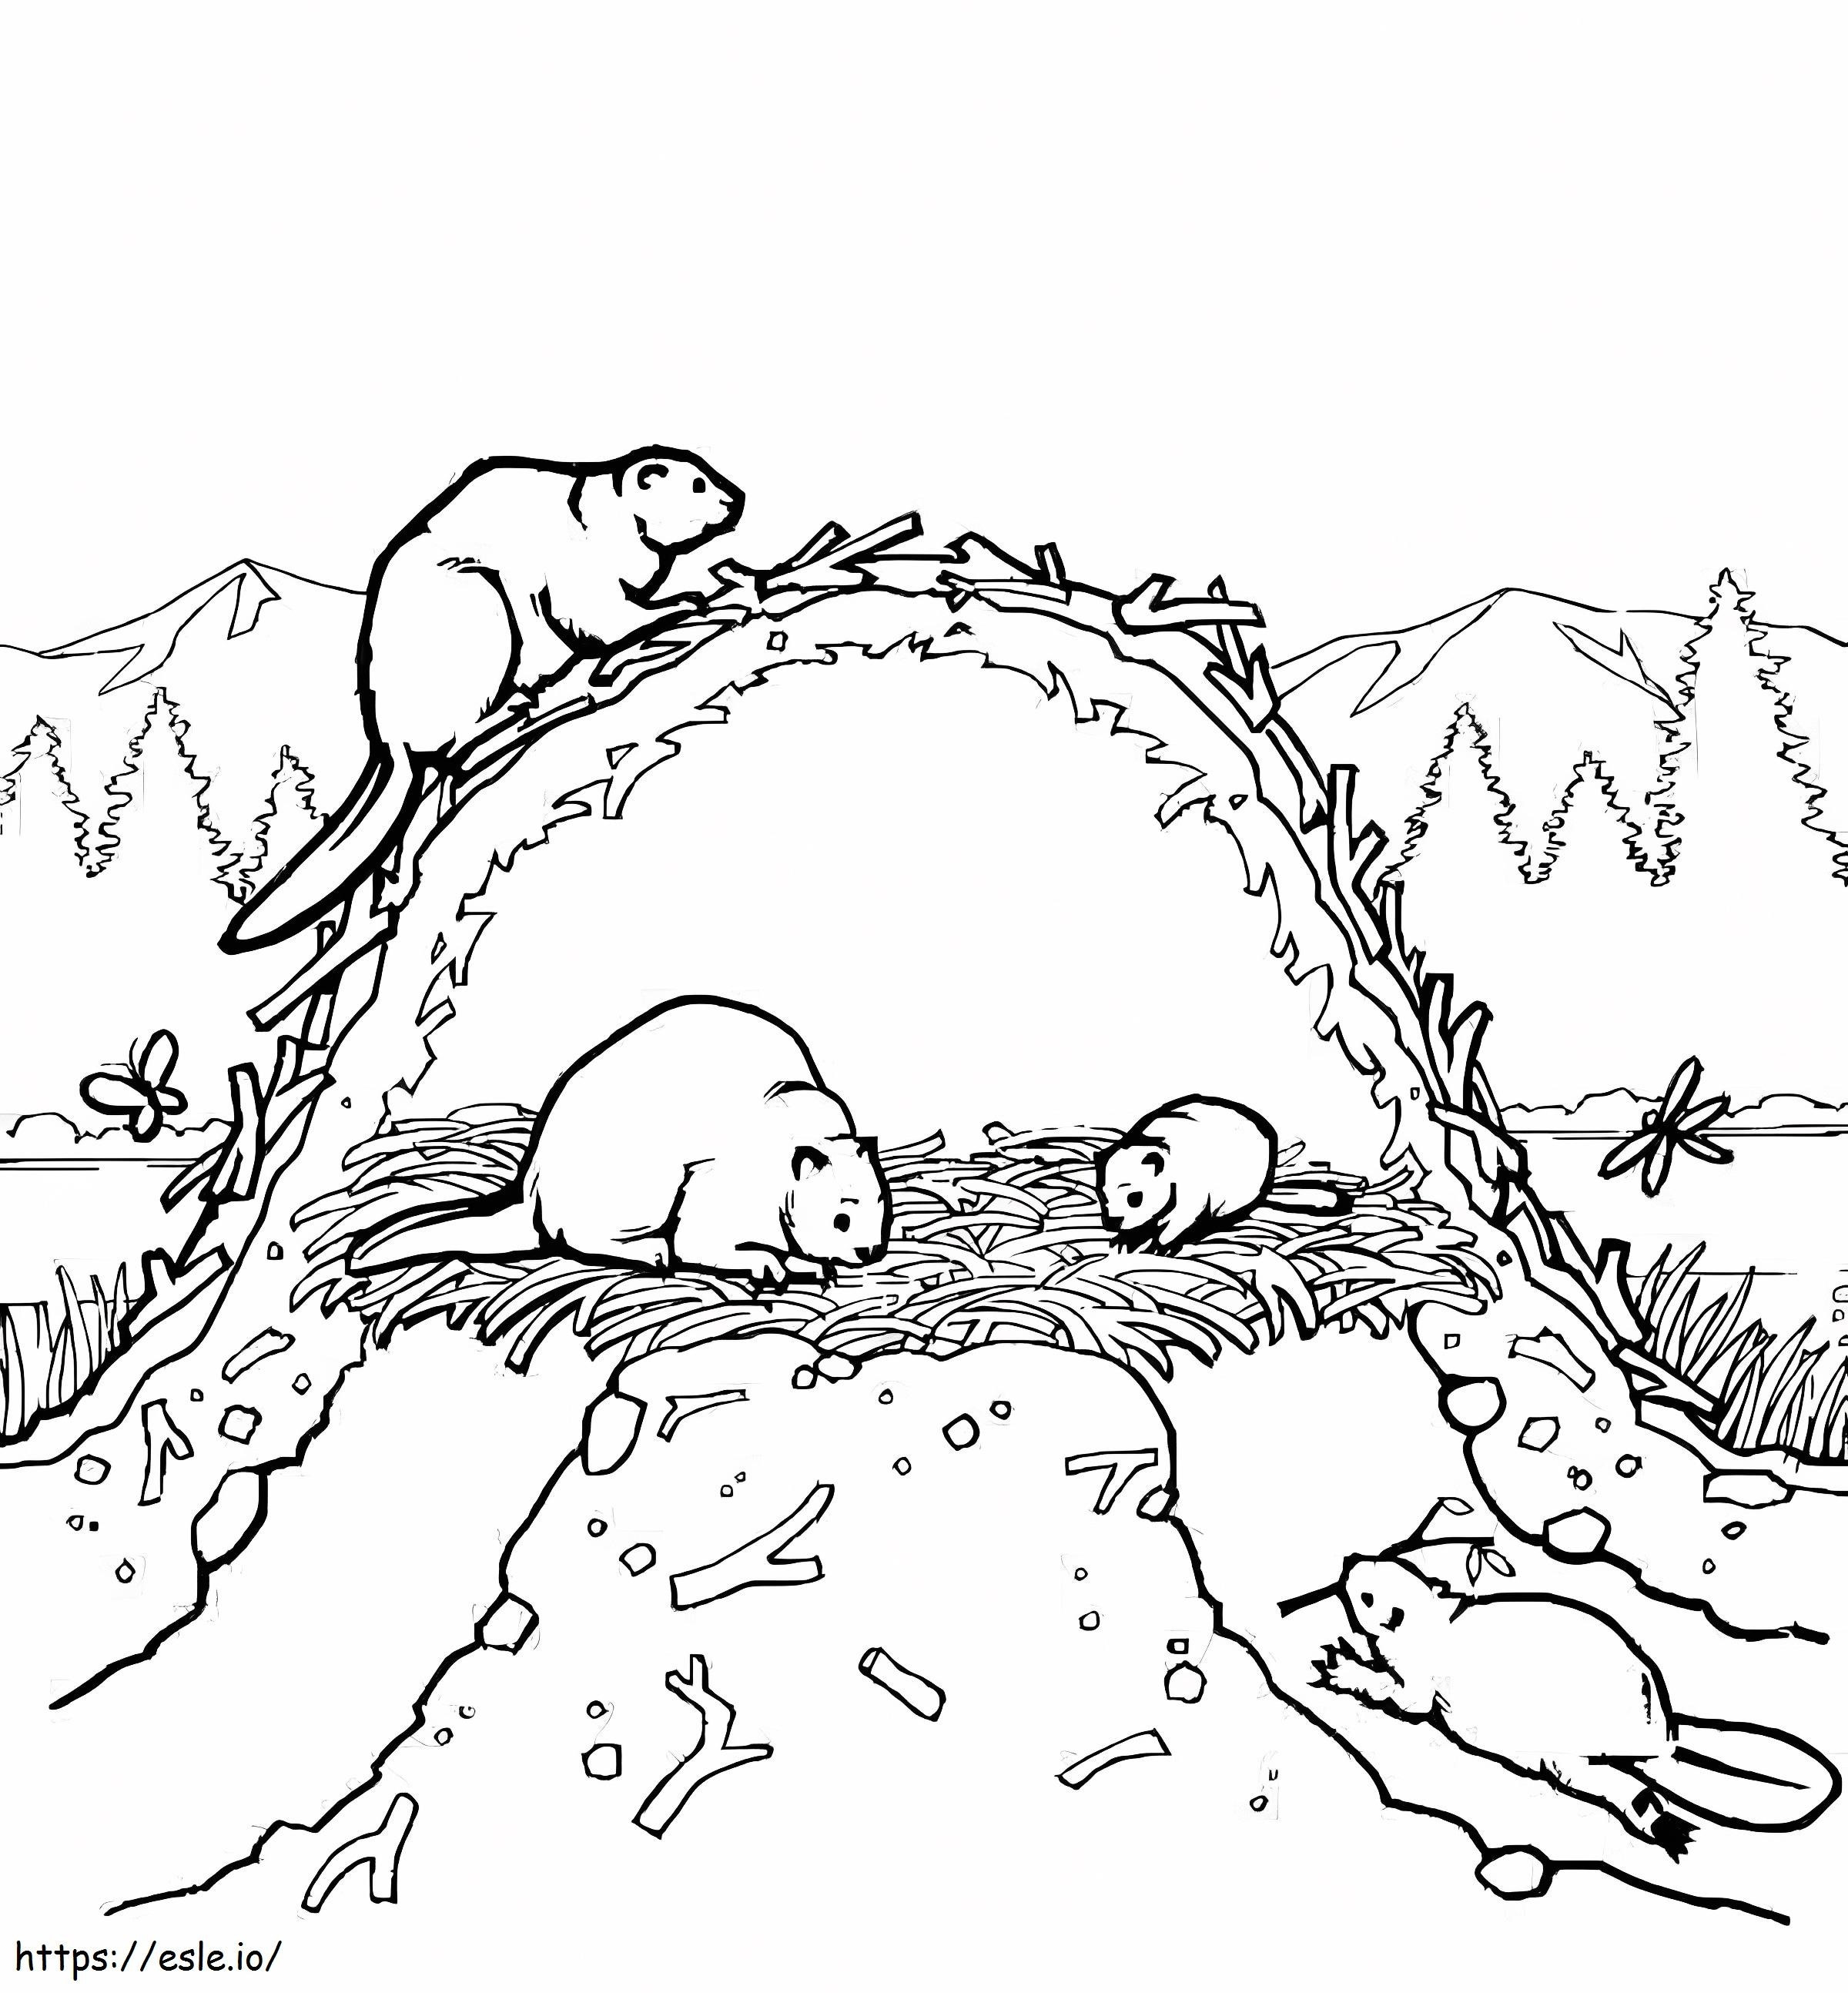 Beaver Family coloring page